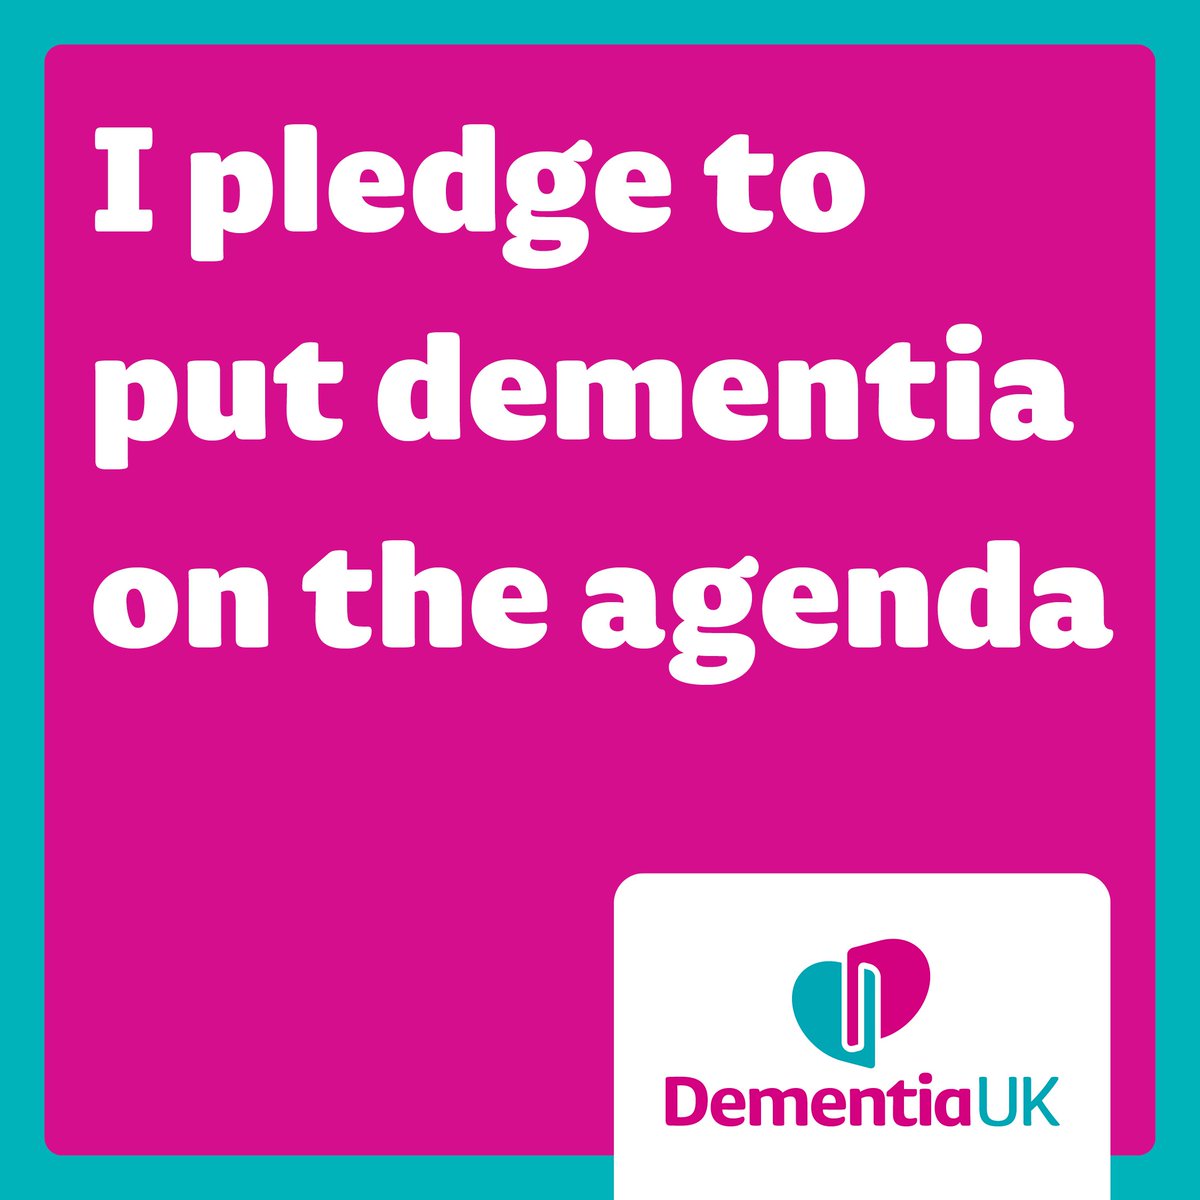 One in two of us will be affected by dementia in our lifetime. I support @DementiaUK ’s manifesto to put dementia on the agenda at the next election and transform dementia care for everyone #PutDementiaOnTheAgenda @AbrValleyLibDem @erewashlibdems @DerbyLibDems @LibDems #GE2024